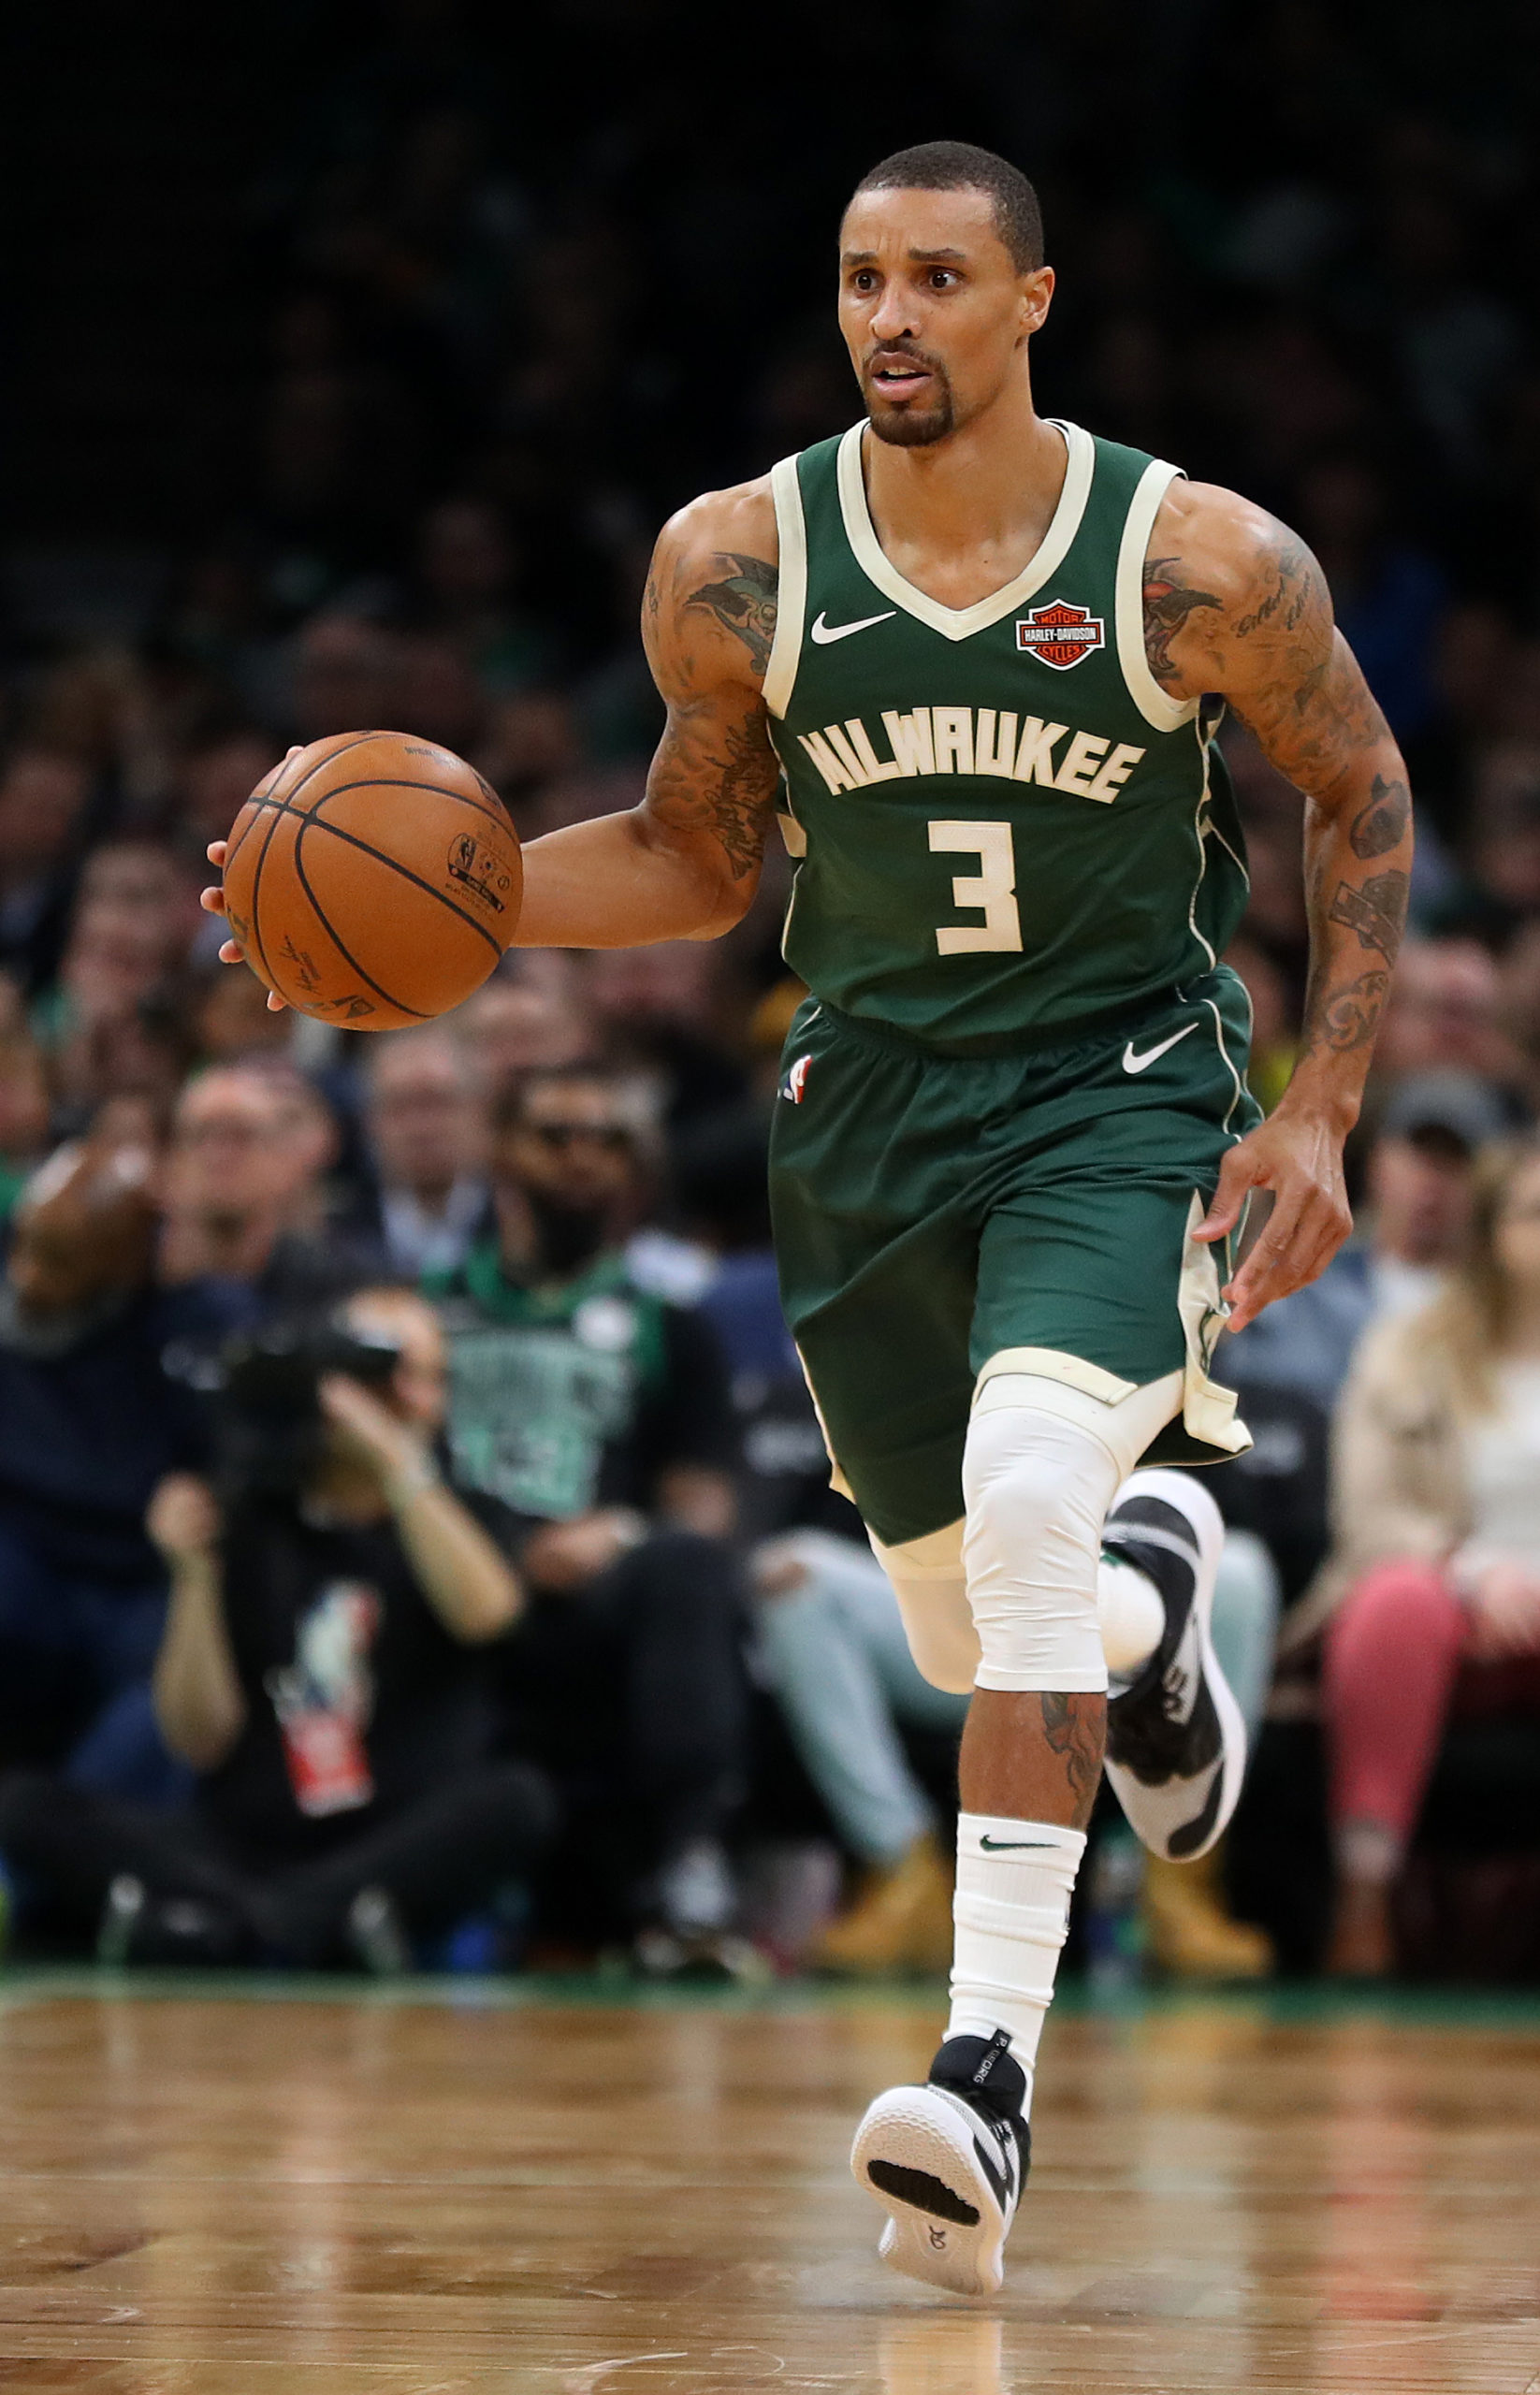 Guard George Hill agrees to new deal with Bucks - WTMJ